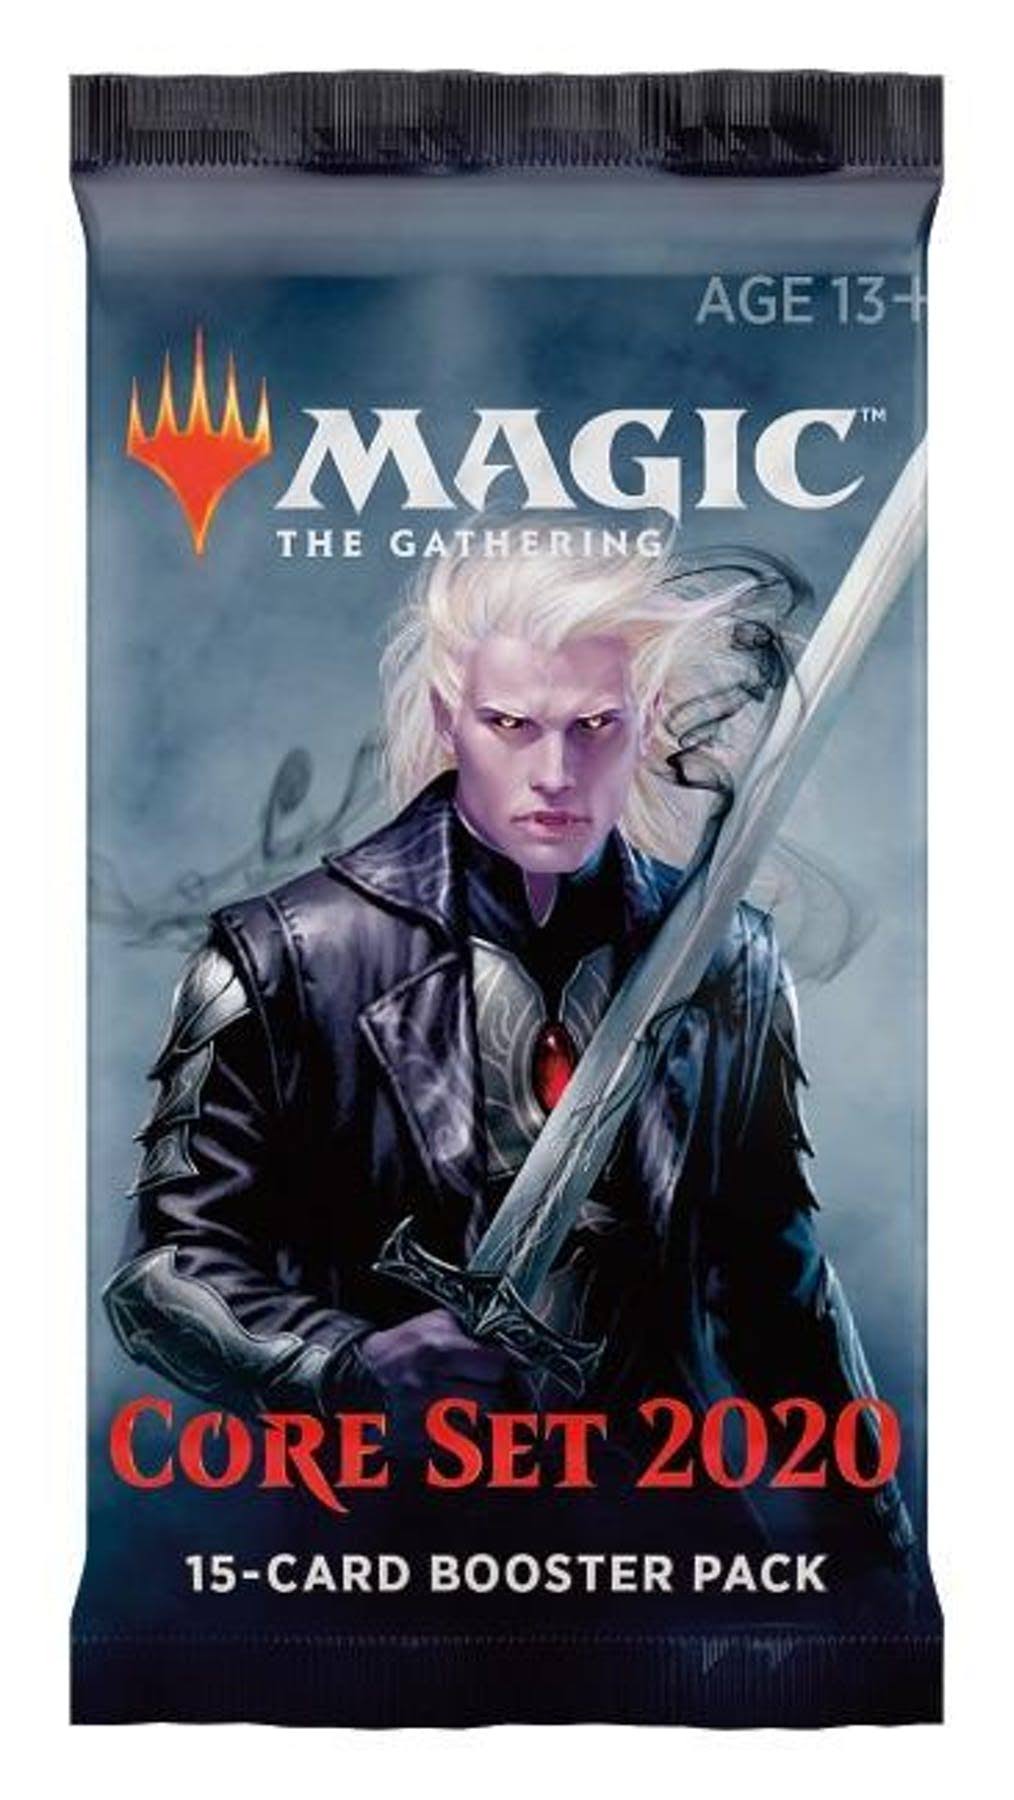 2020 Core Set Magic: The Gathering - Booster Pack